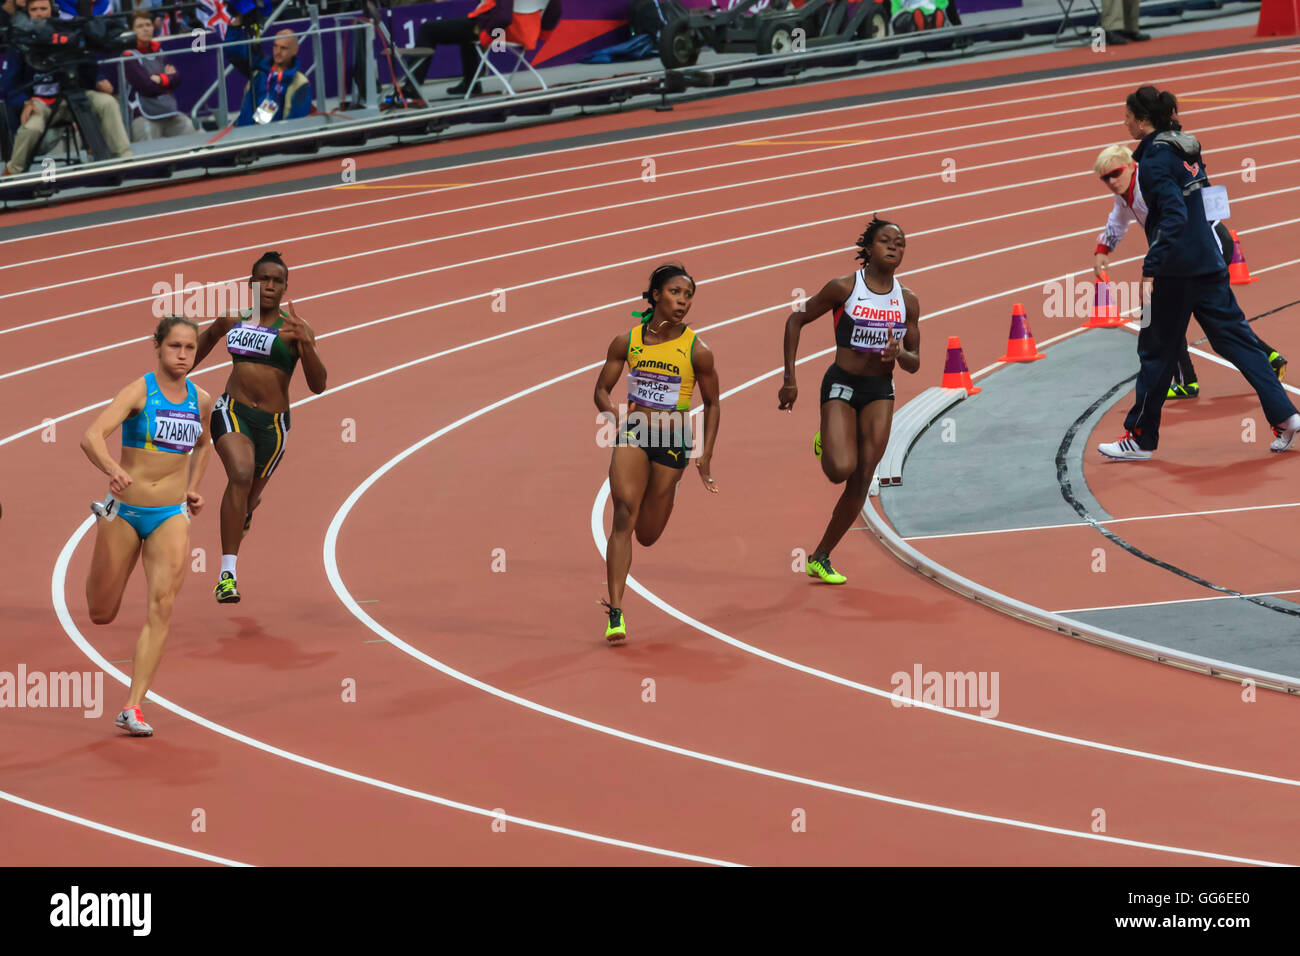 Shelly-Ann Fraser-Pryce, Jamaica, runs the bend in the Women's 200m round 1, London 2012, Summer Olympic Games, London, UK Stock Photo